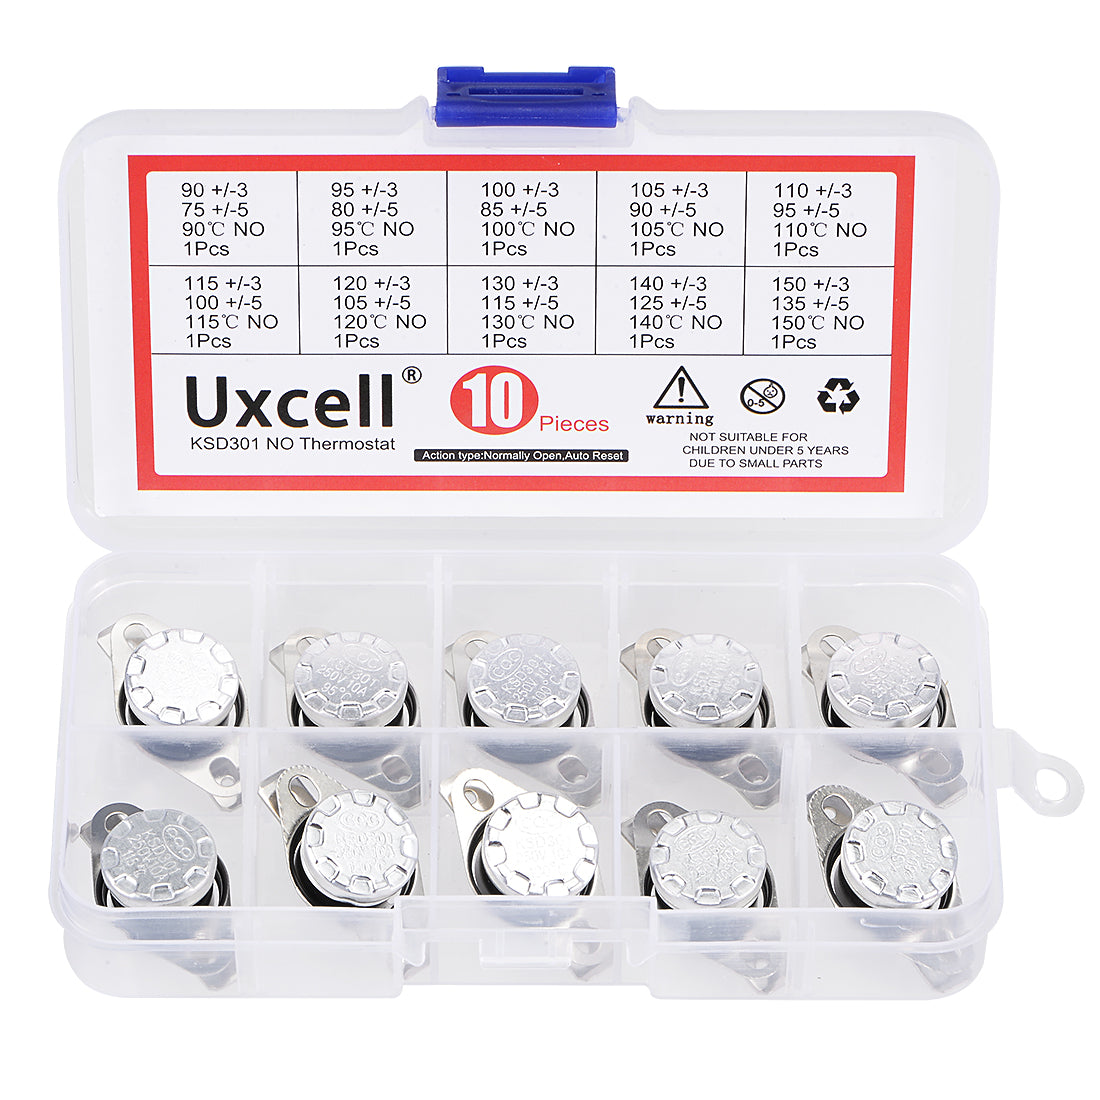 uxcell Uxcell 10pcs NO KSD301 Thermostat 90-150°C(194-302℉) Temperature Thermal Control Switch 90 95 100 105 110 115 120 130 140 150°C Normally Open Assortment Kit